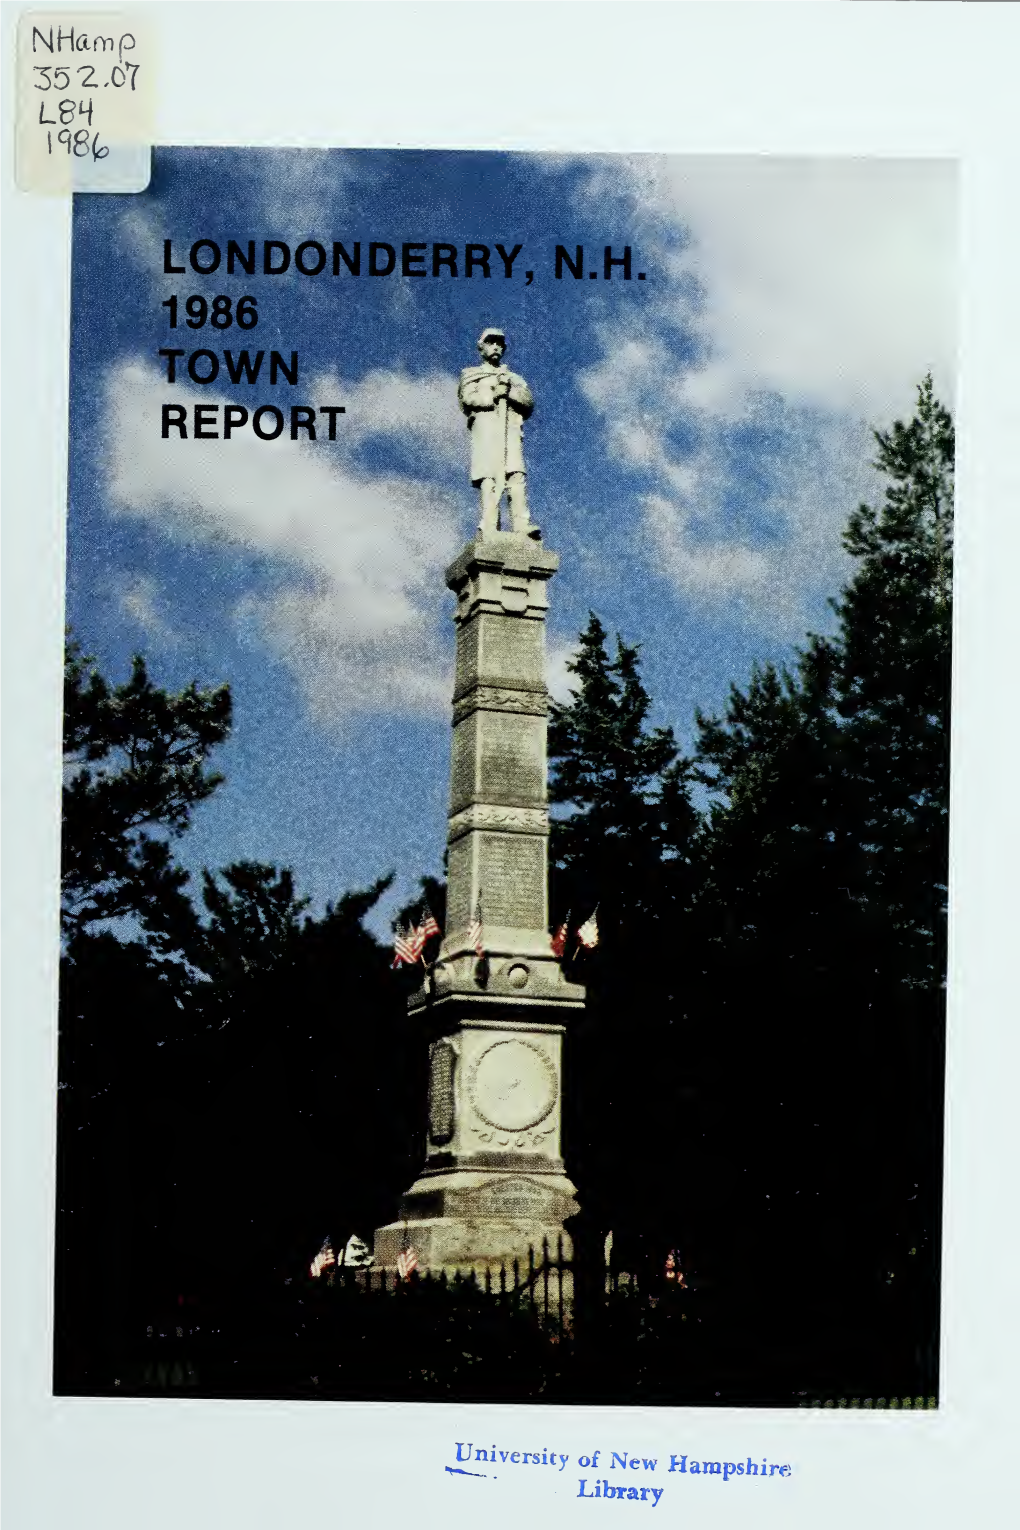 Annual Report of the Town of Londonderry, New Hampshire